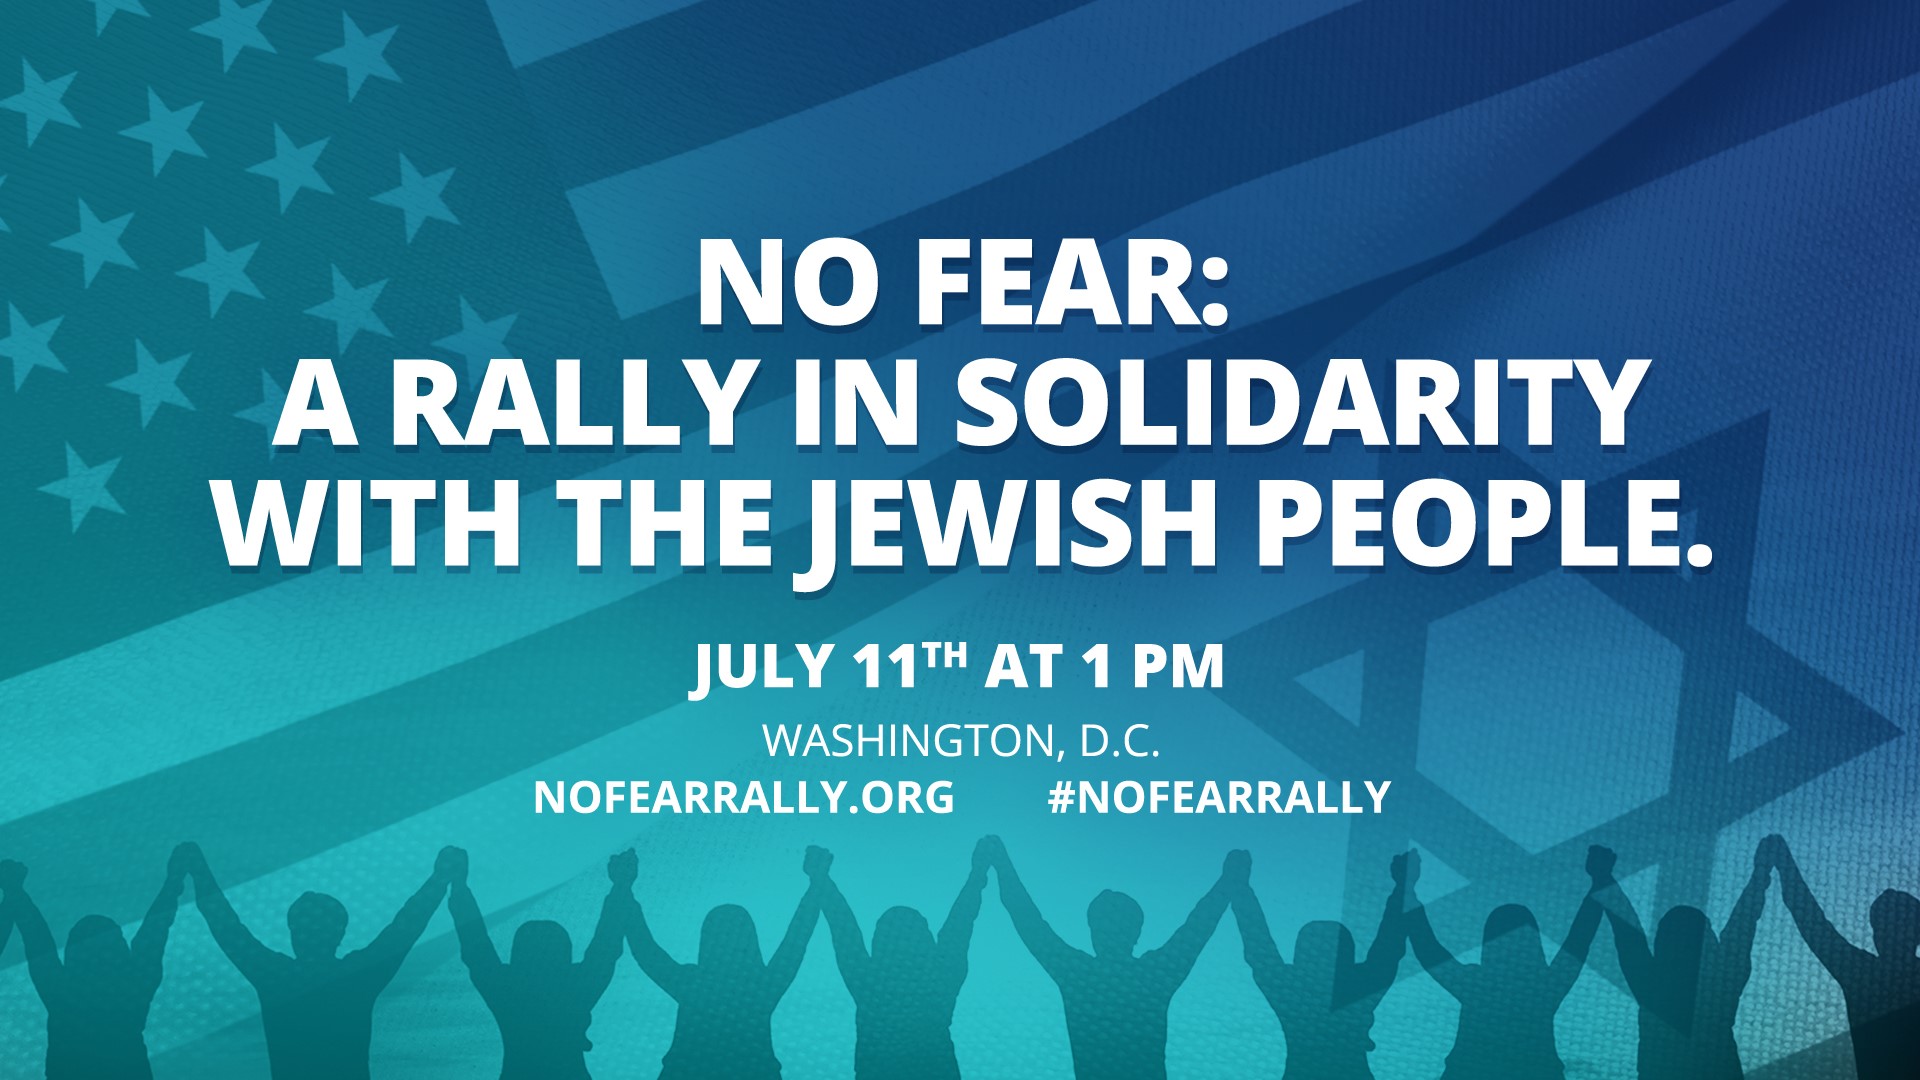 NO FEAR: A RALLY IN SOLIDARITY WITH THE JEWISH PEOPLE